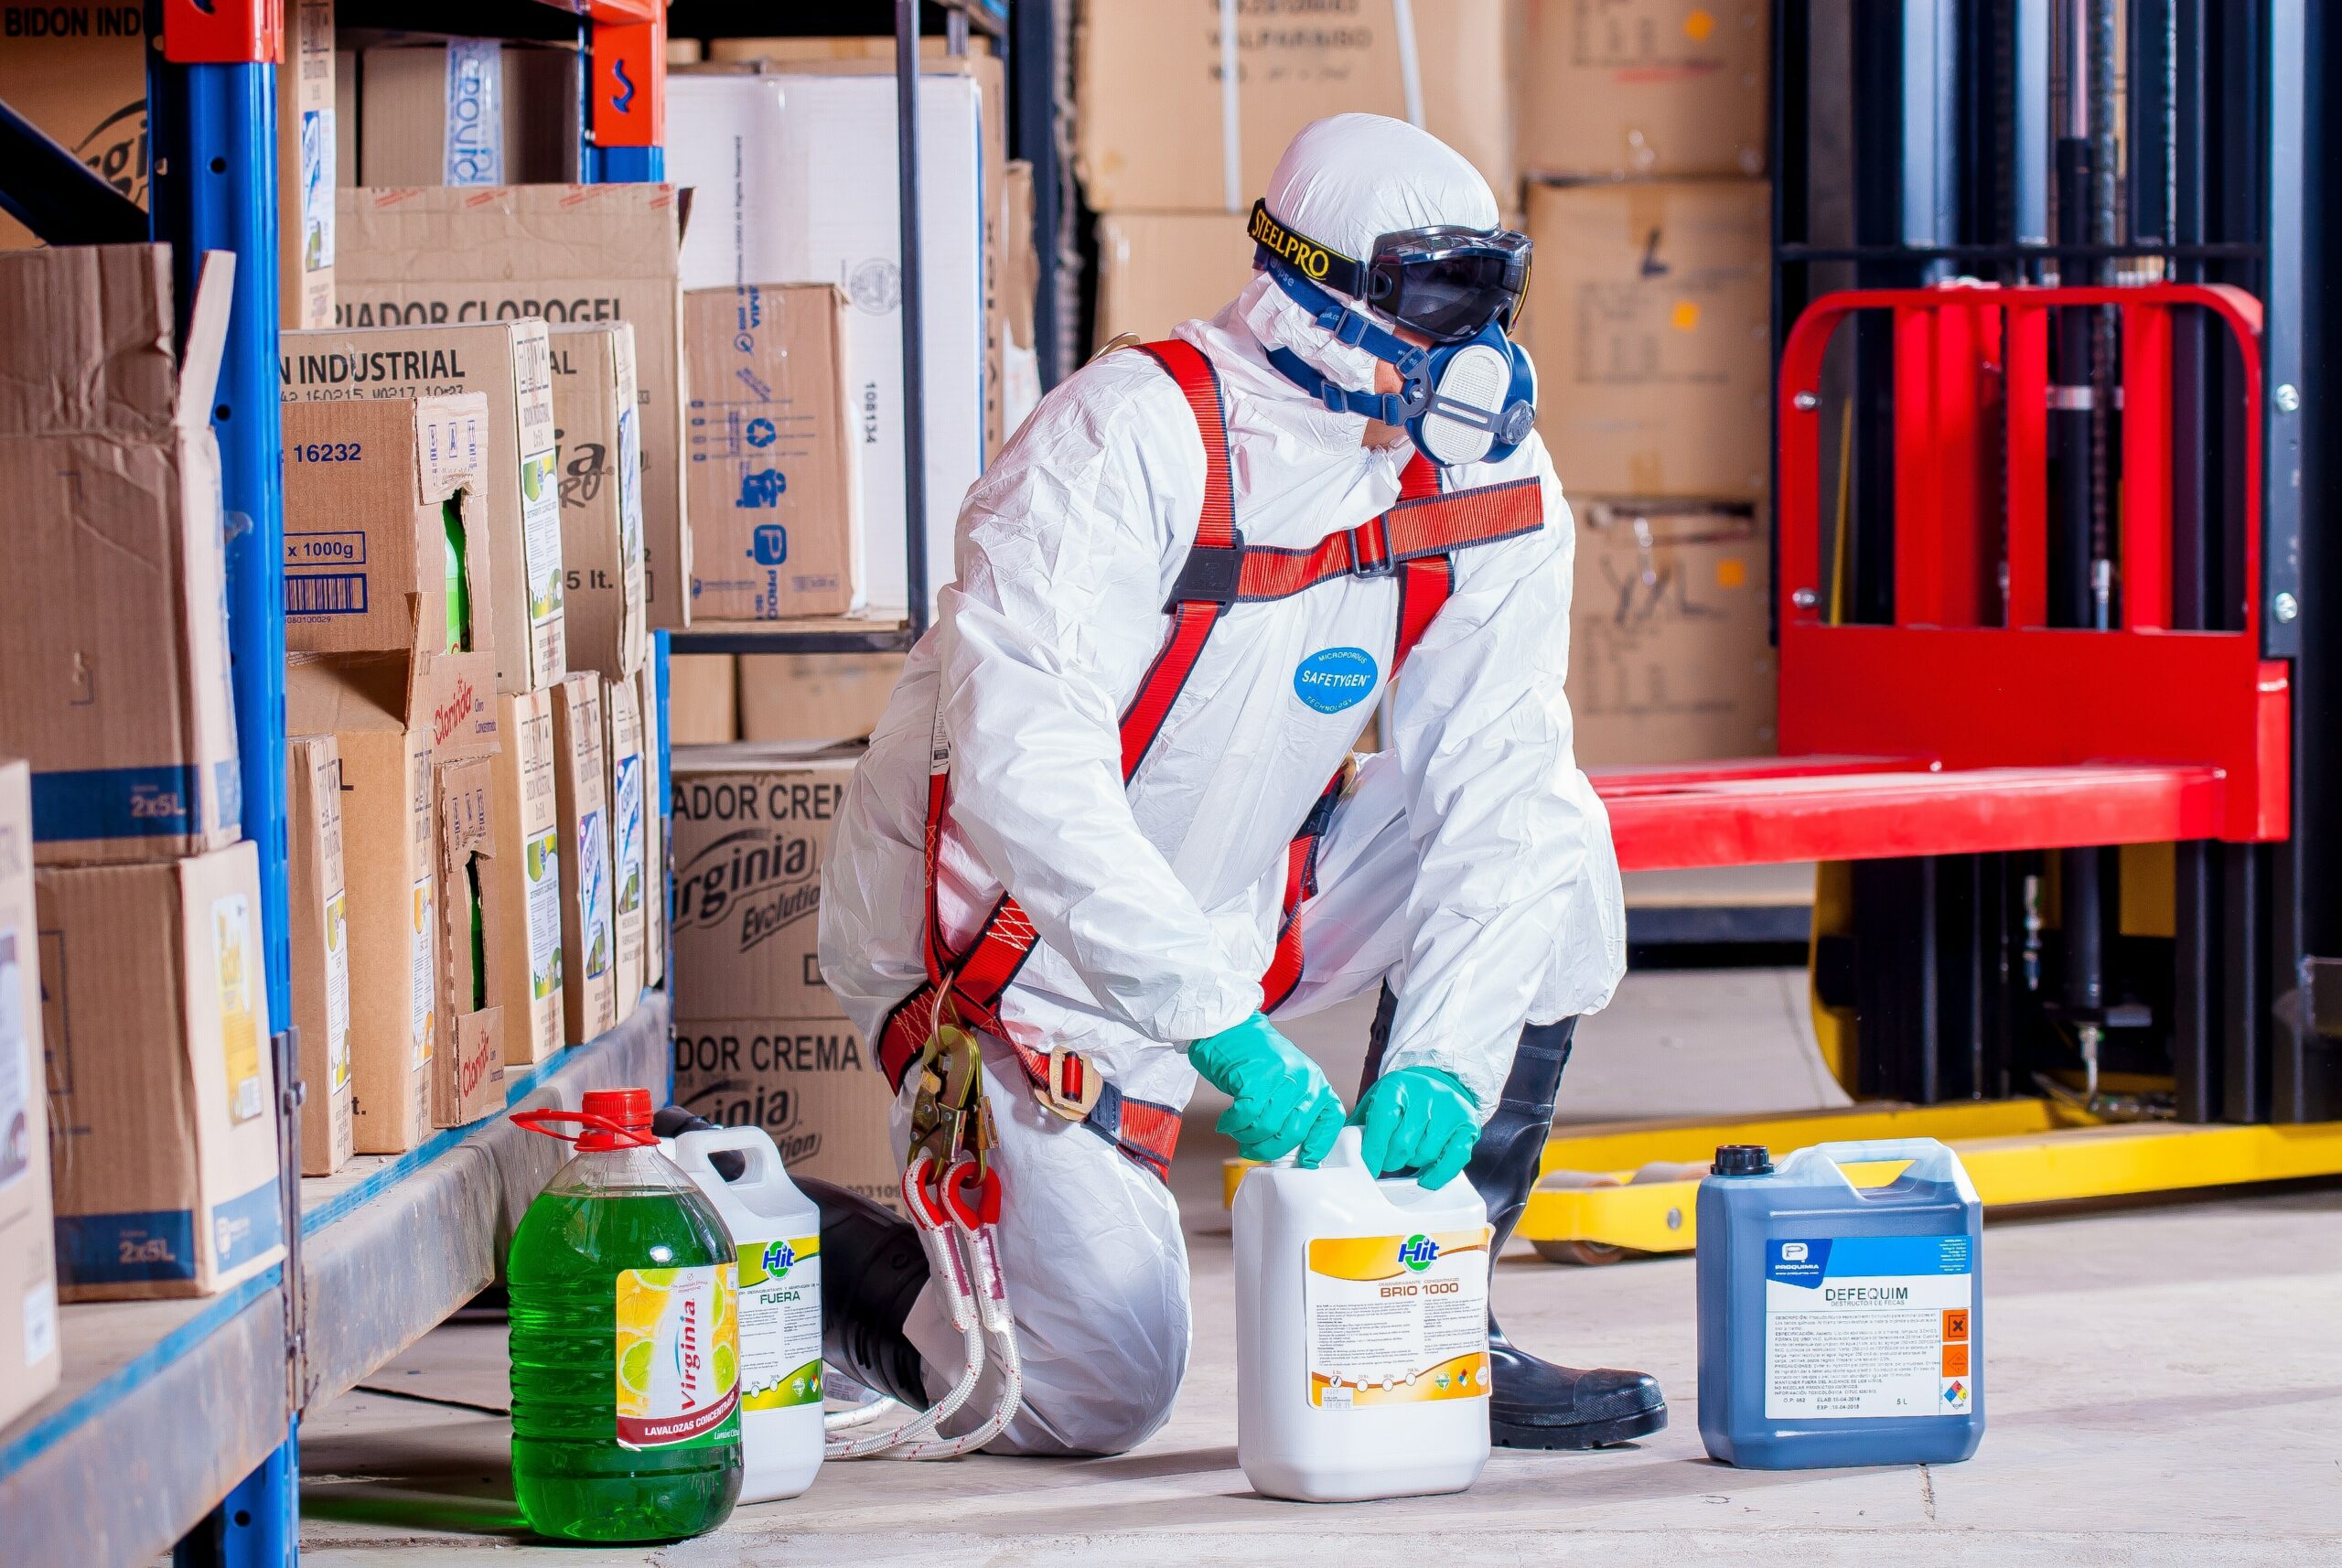 Safety is taken serisouly at Ontario Cleaning Supply and Services.